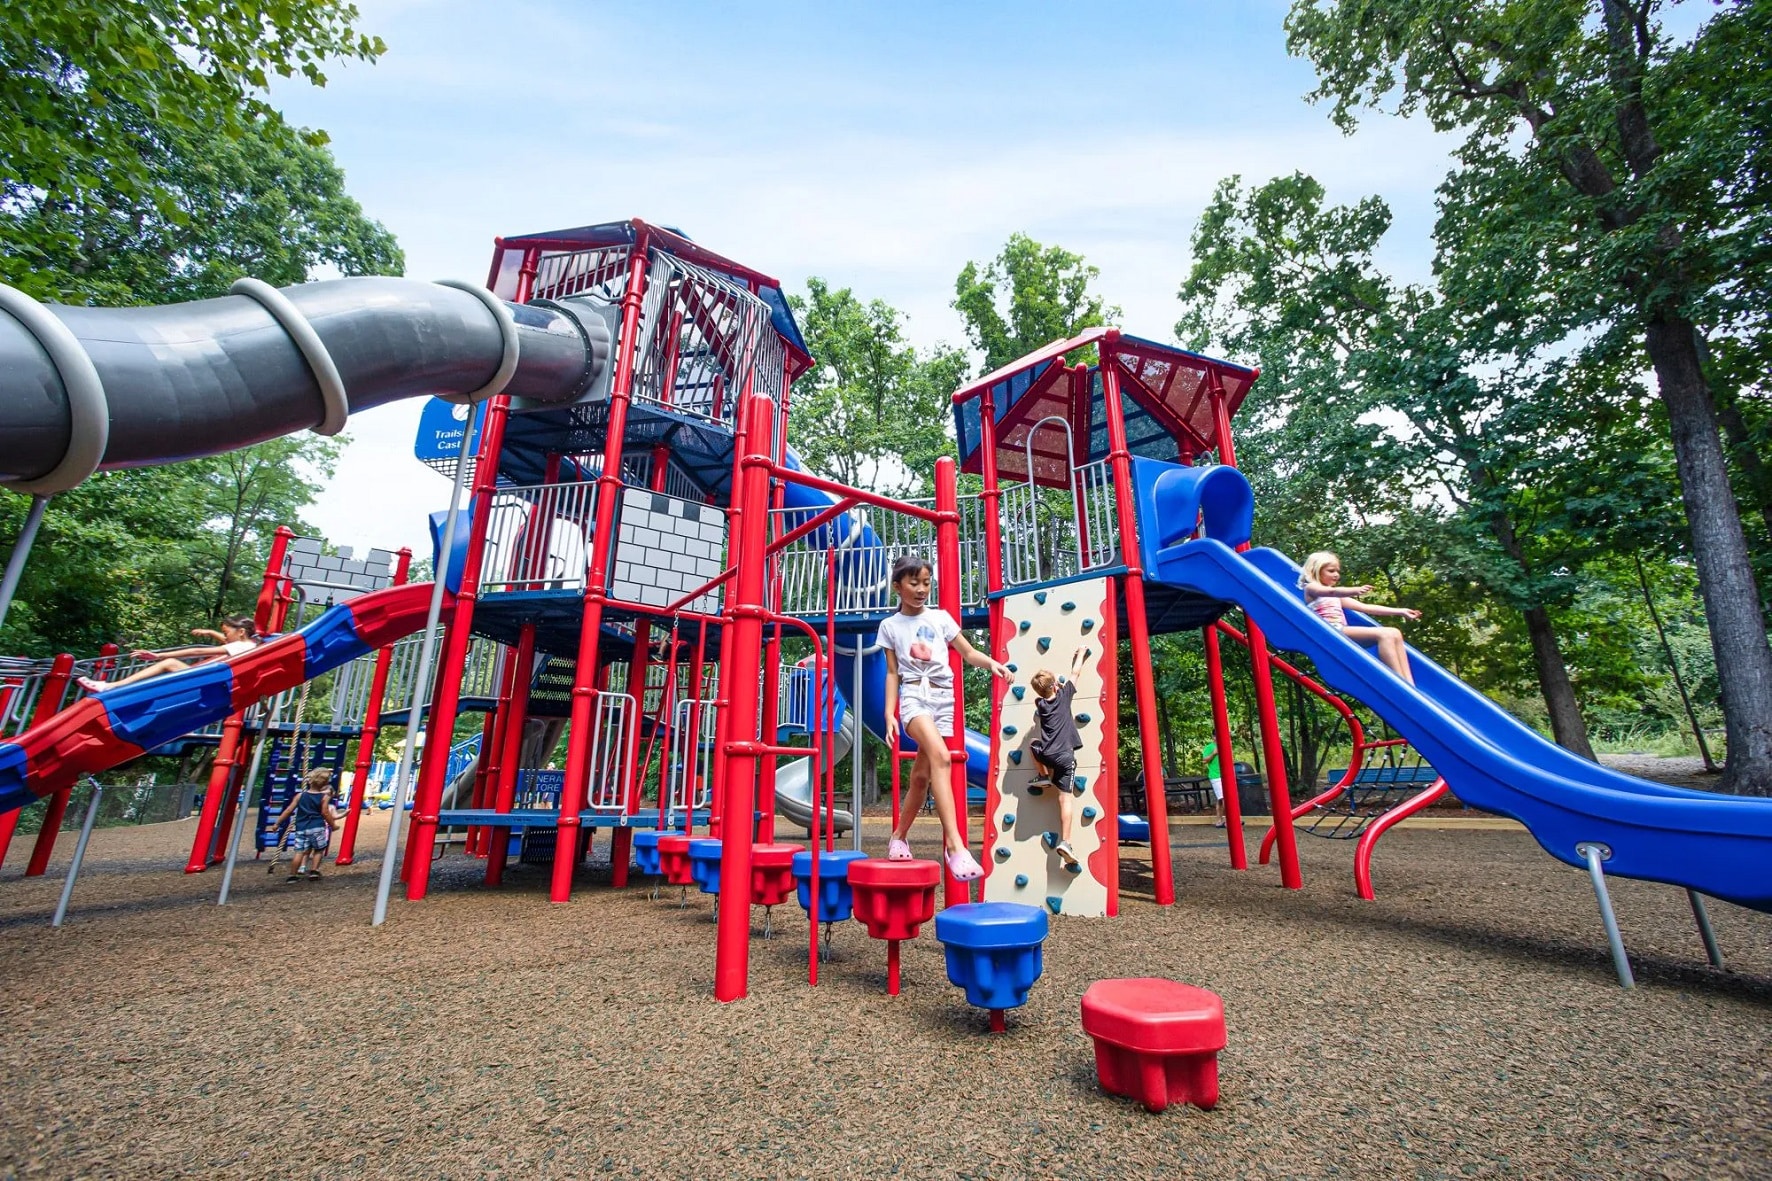 Guide to Choosing Playground Equipment for Ages 5-12